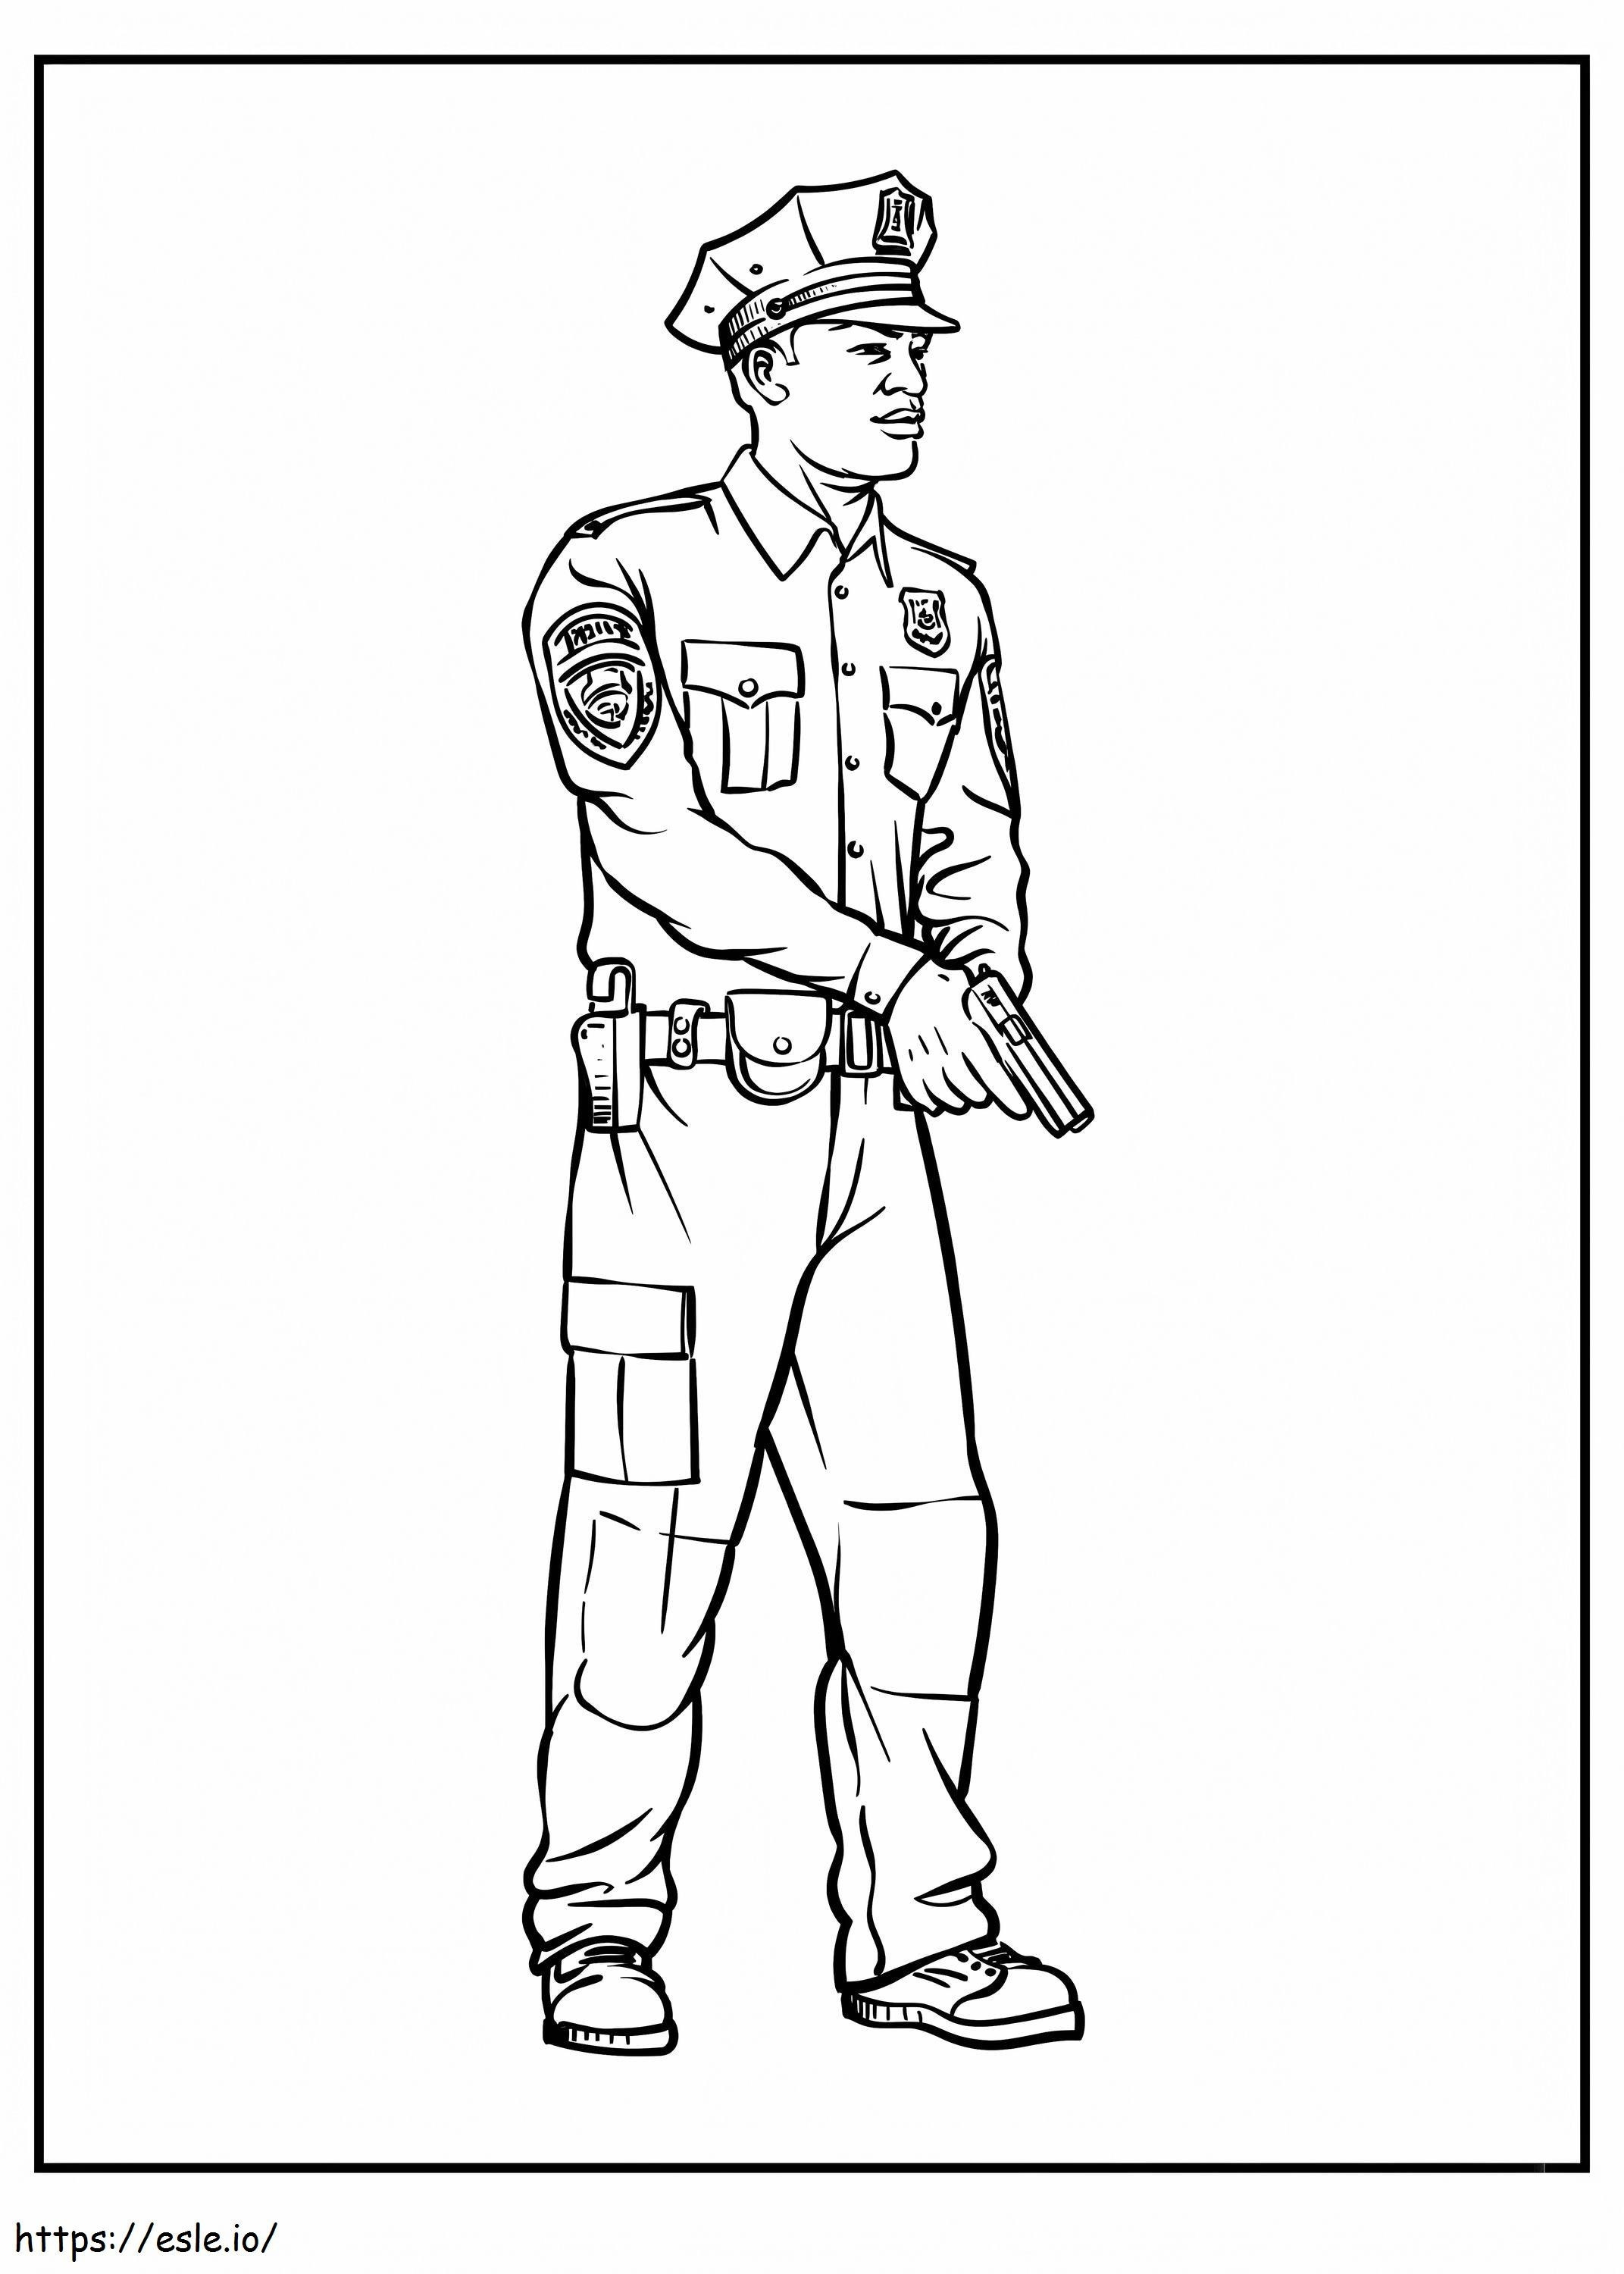 Police Holding Gun coloring page